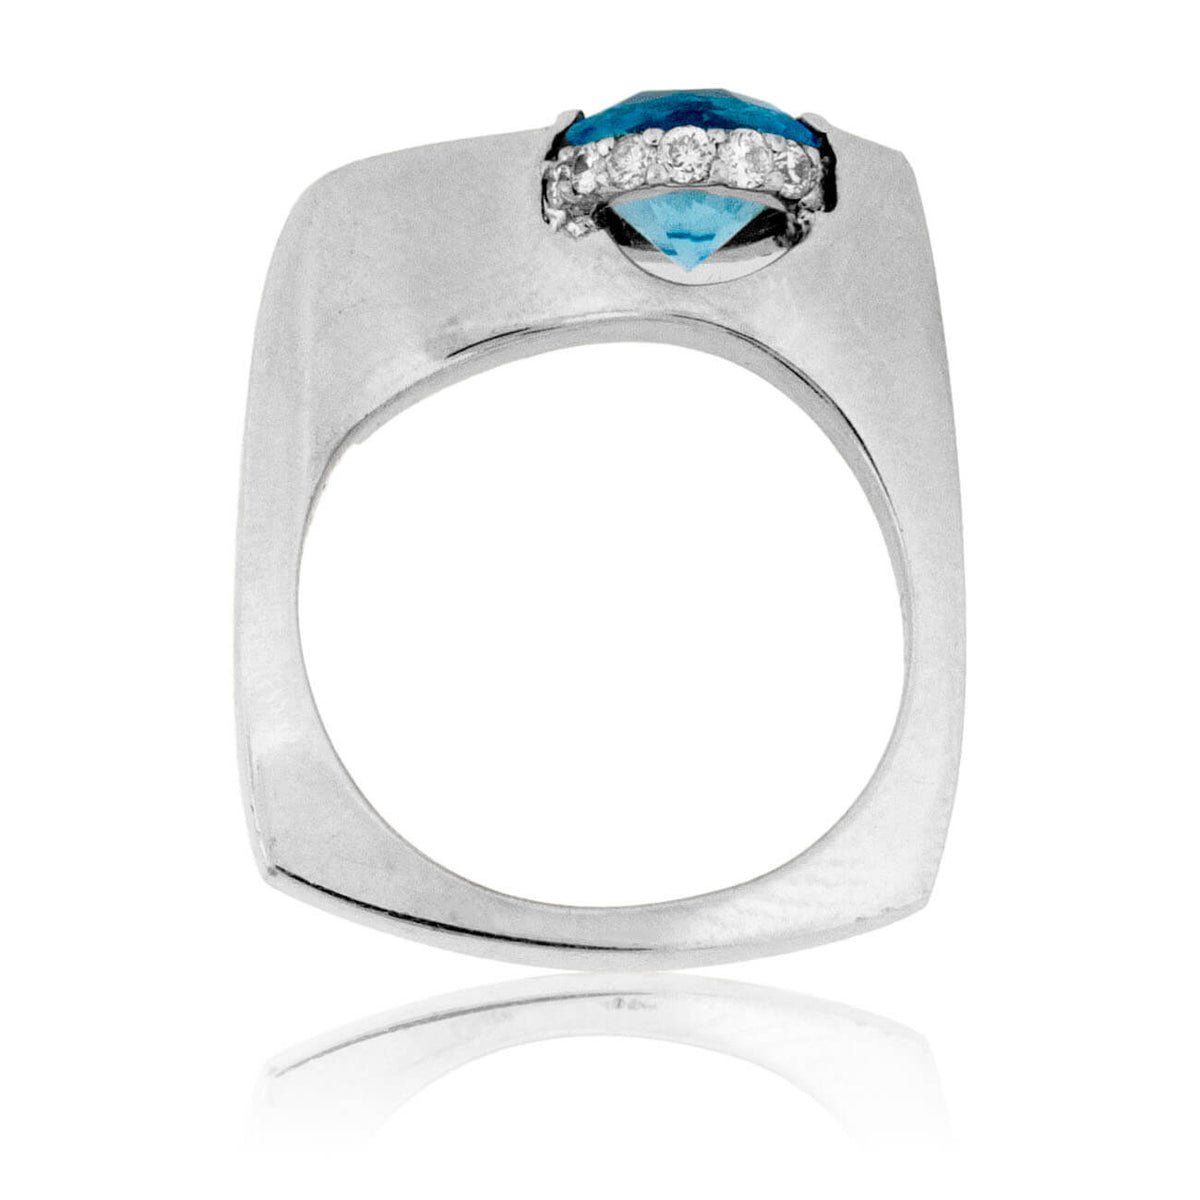 Fancy Round Cut Blue Topaz and Diamond Ring - Park City Jewelers